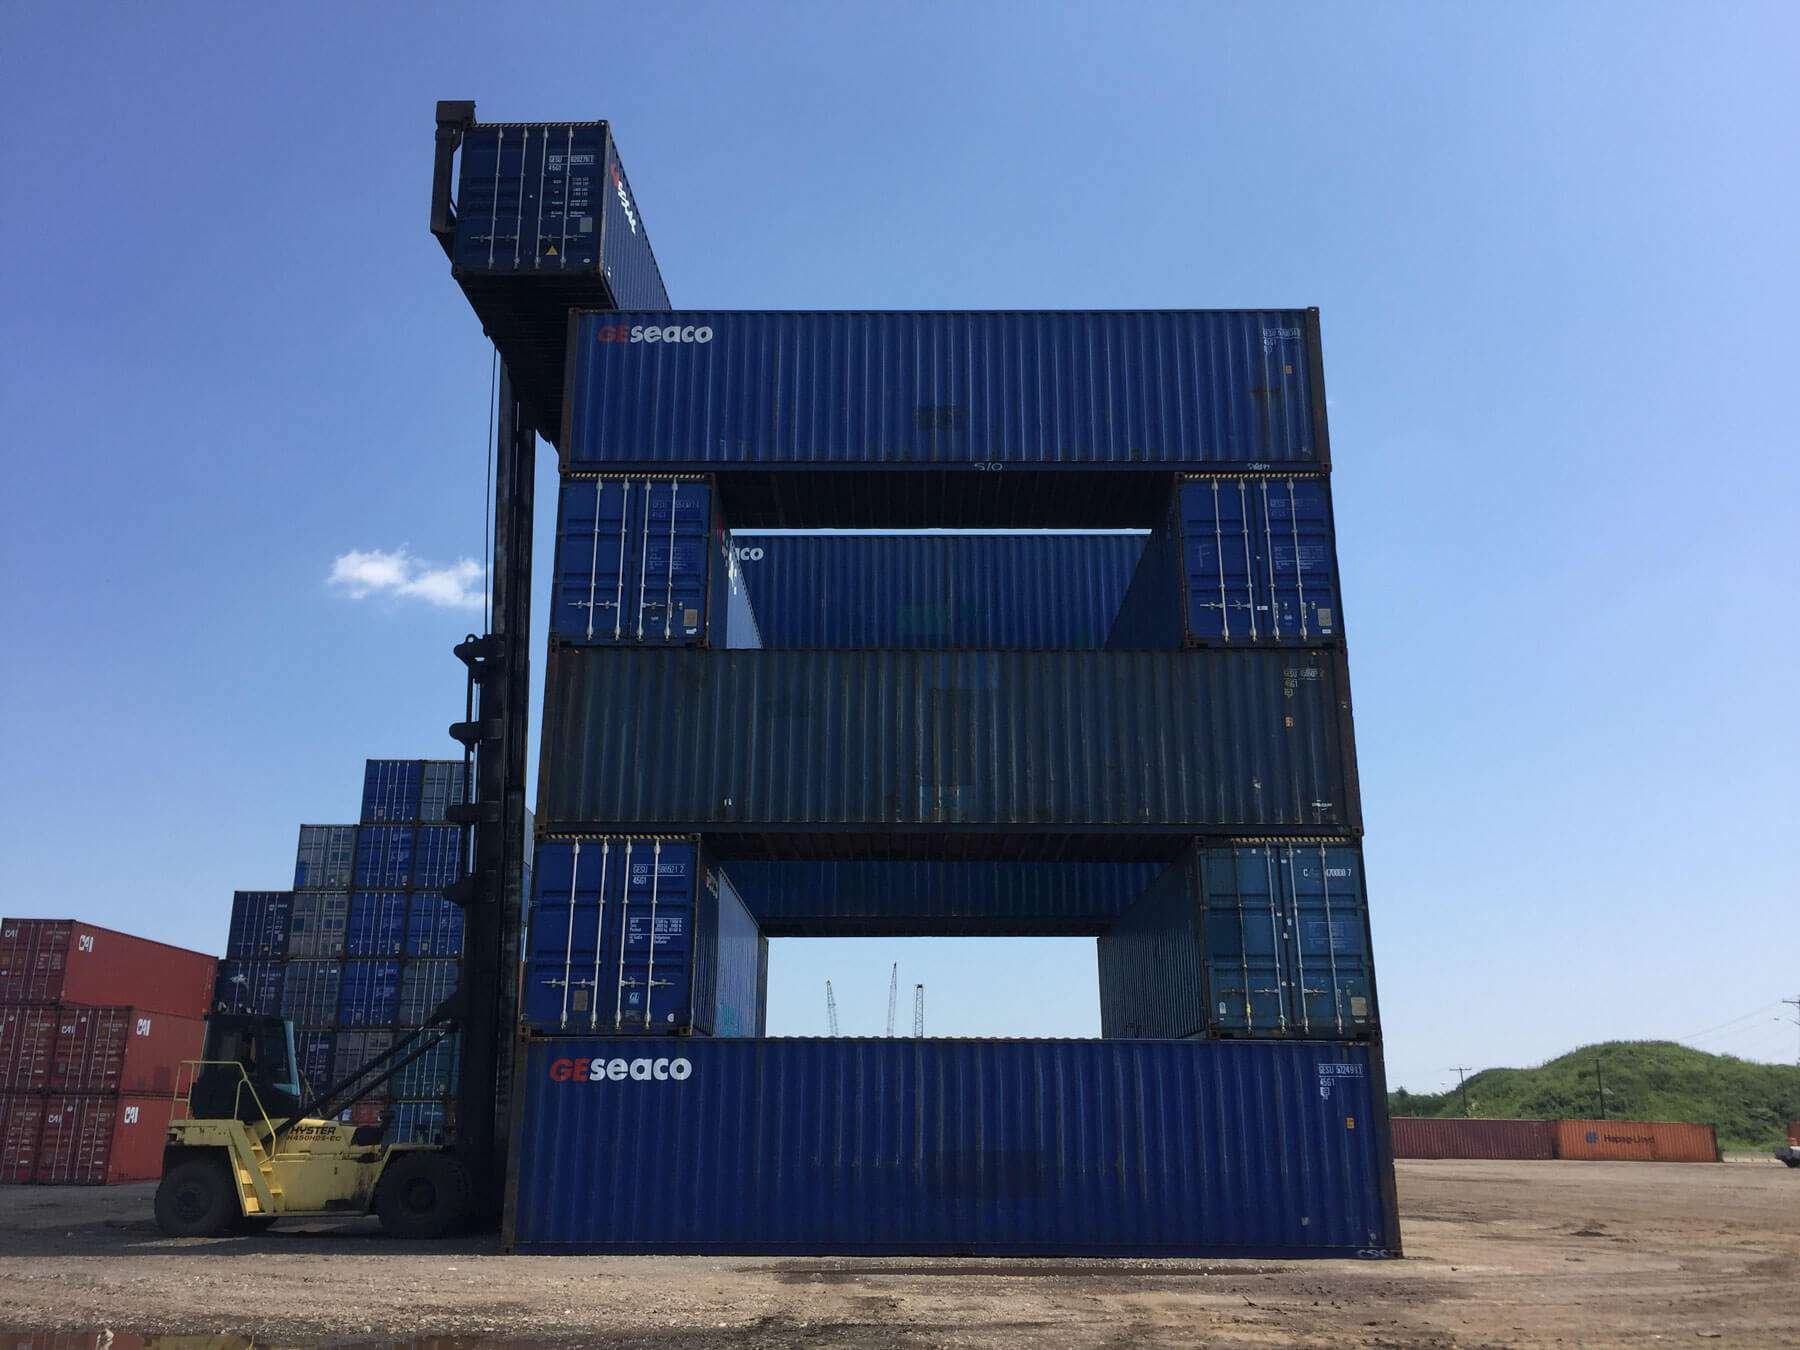  Blue shipping containers. 